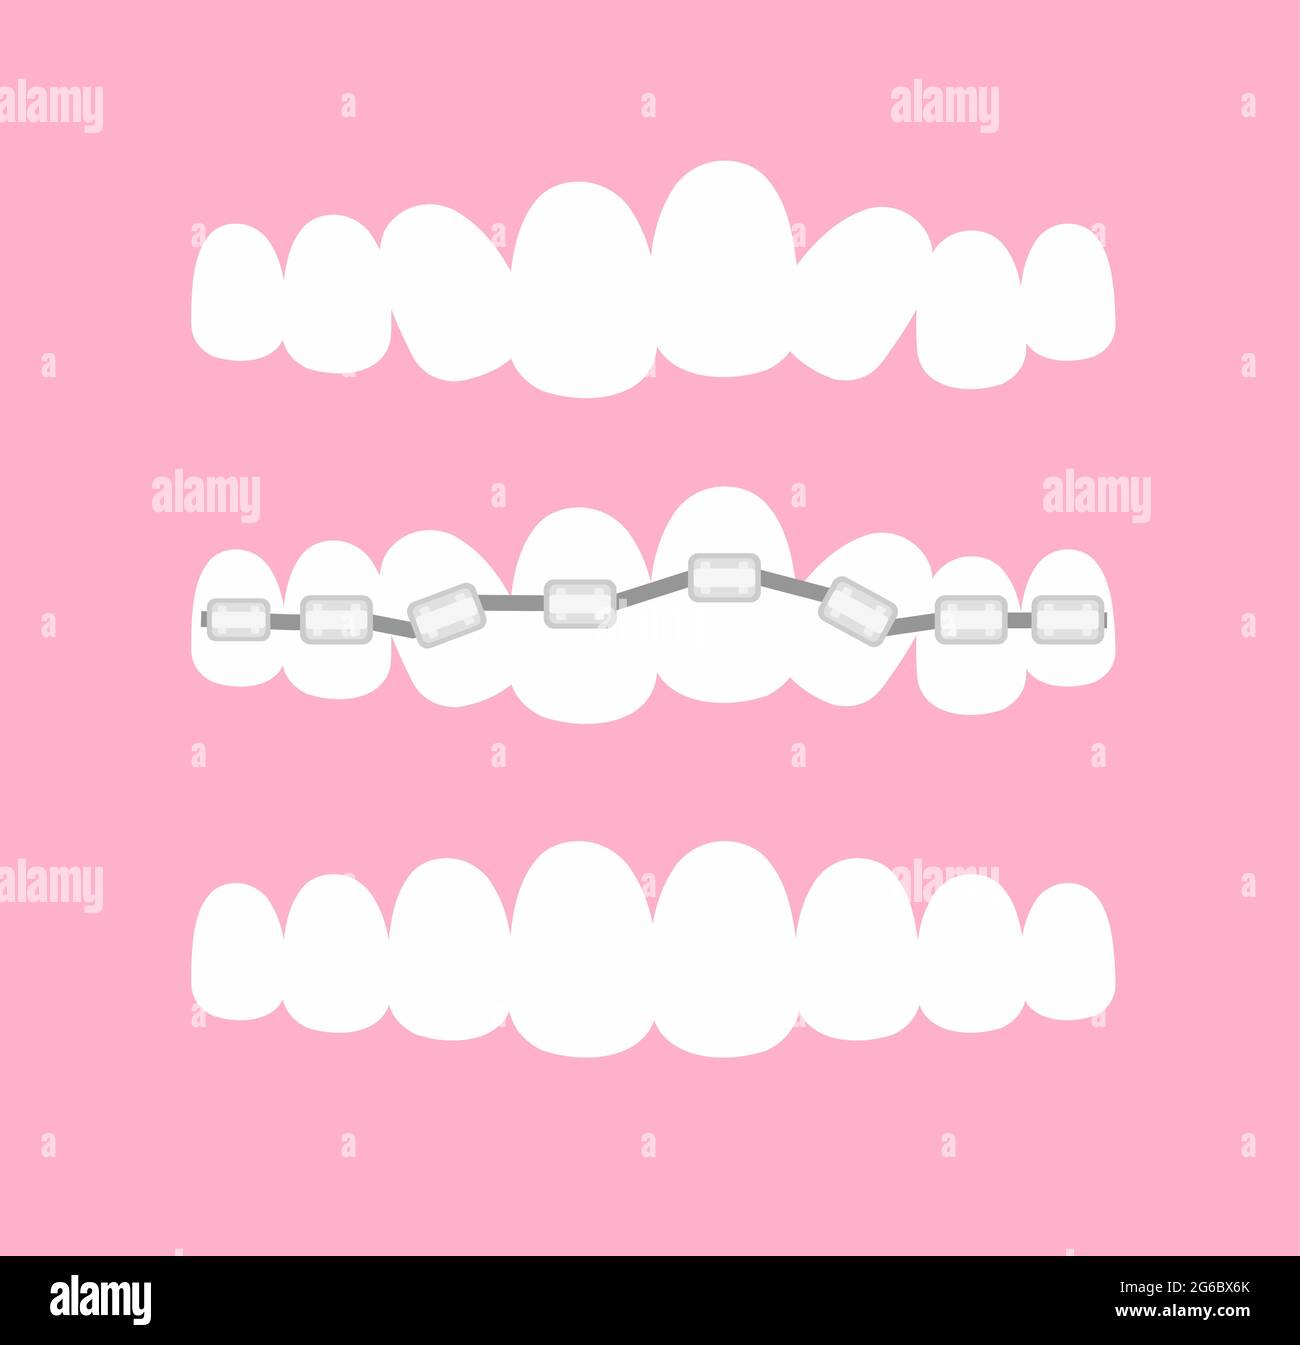 Vector illustration of the stages of orthodontic treatment braces on teeth . Teeth before and after braces on pink background in flat cartoon style. Stock Vector